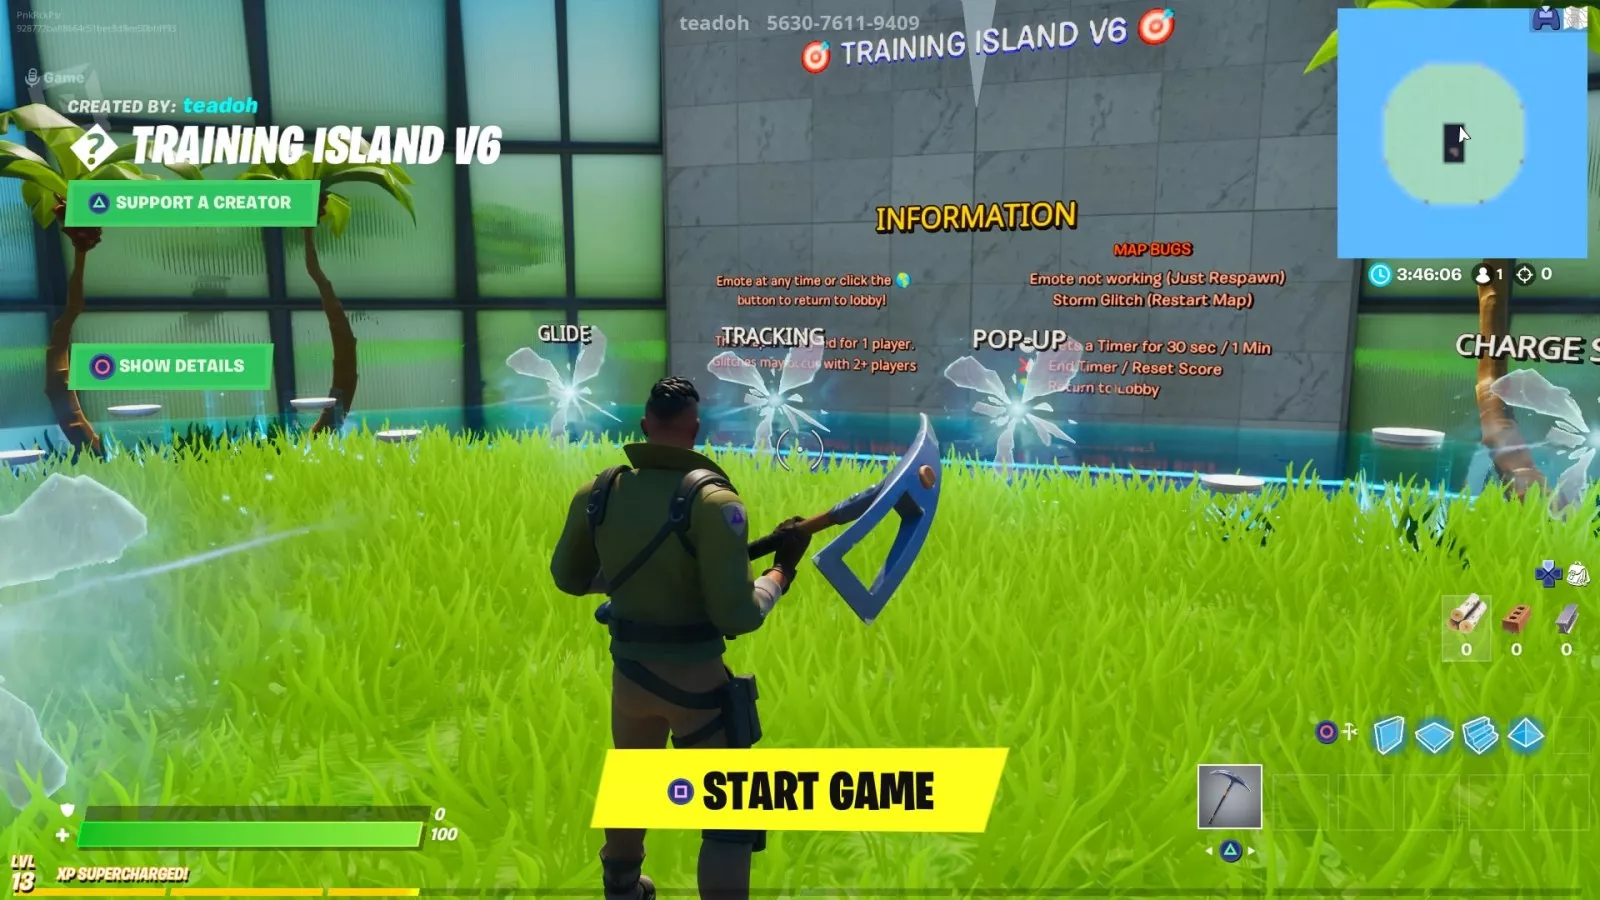 Fortnite Aim Training Map Codes – The 10 Best Maps in 2023